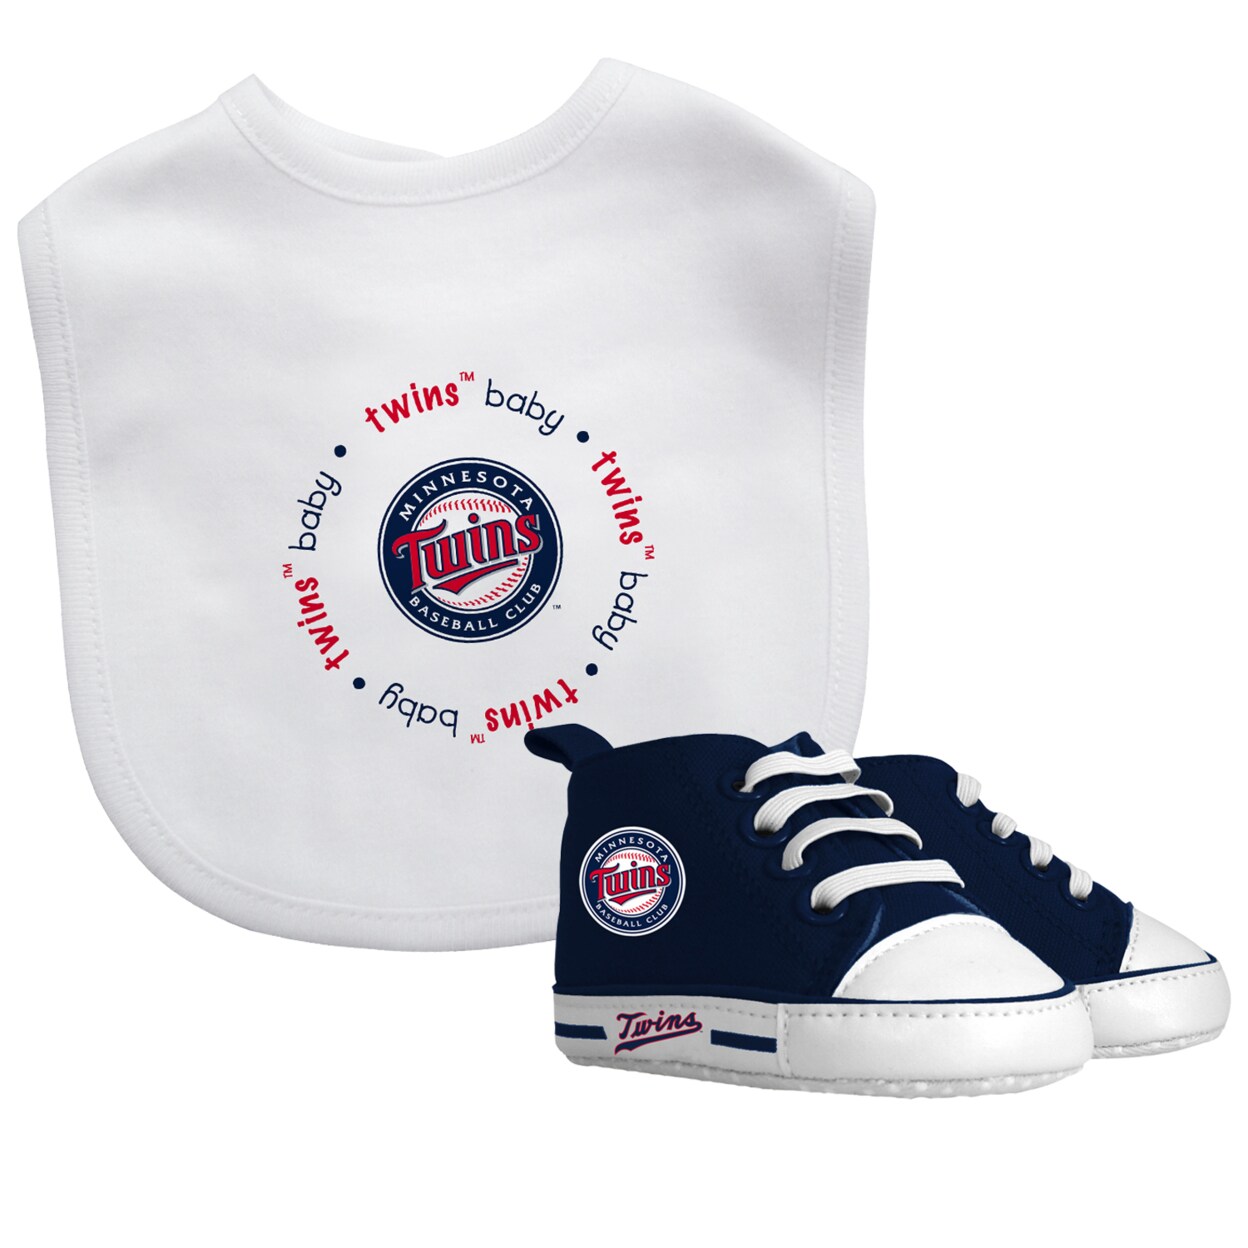 MasterPieces Baby Fanatic 2 Piece Bid and Shoes - MLB Minnesota